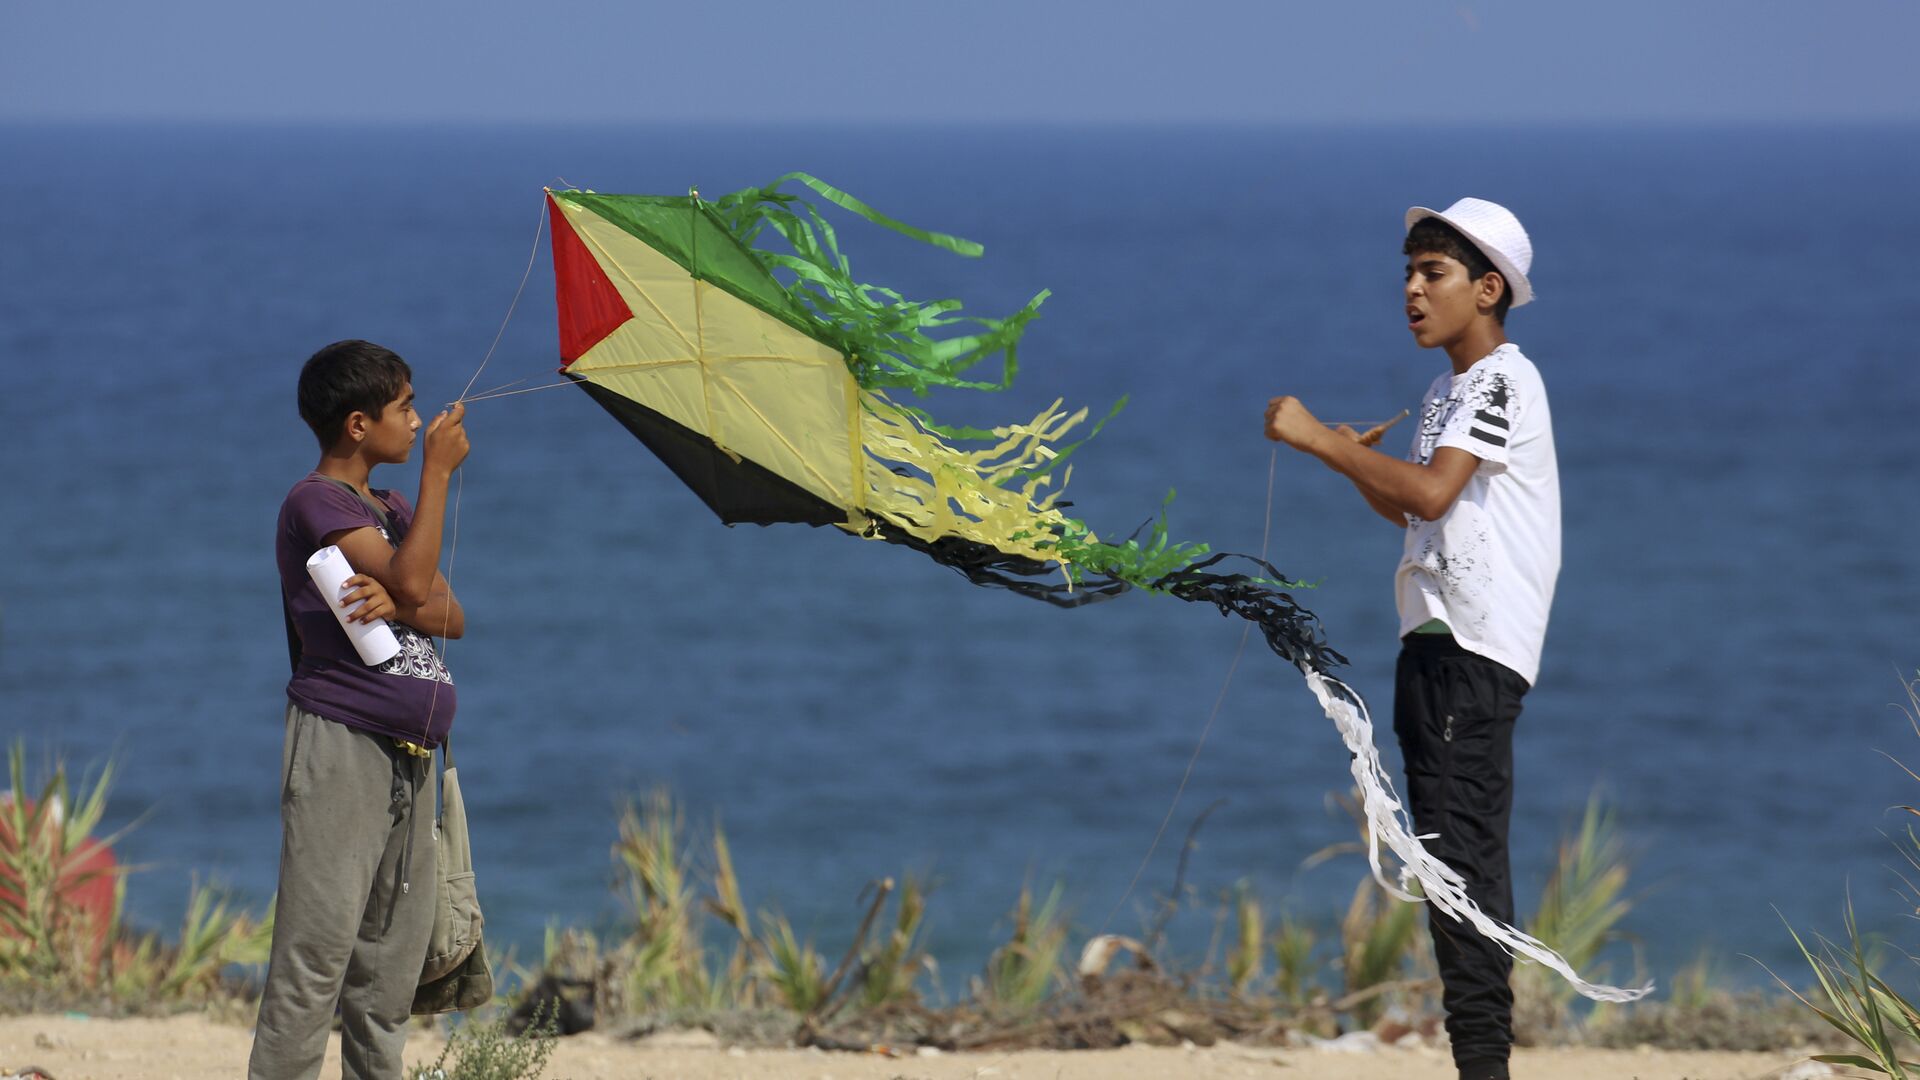 Palestinian youths fly their kites during a Hamas-sponsored summer scout camp, in an event held as a show of support against Israeli security measures installing metal detectors at the Al Aqsa Mosque compound in Jerusalem, on the beach near the Israeli border fence, in Beit Lahiya, northern Gaza Strip, Wednesday, July 19, 2017. - Sputnik International, 1920, 28.11.2023